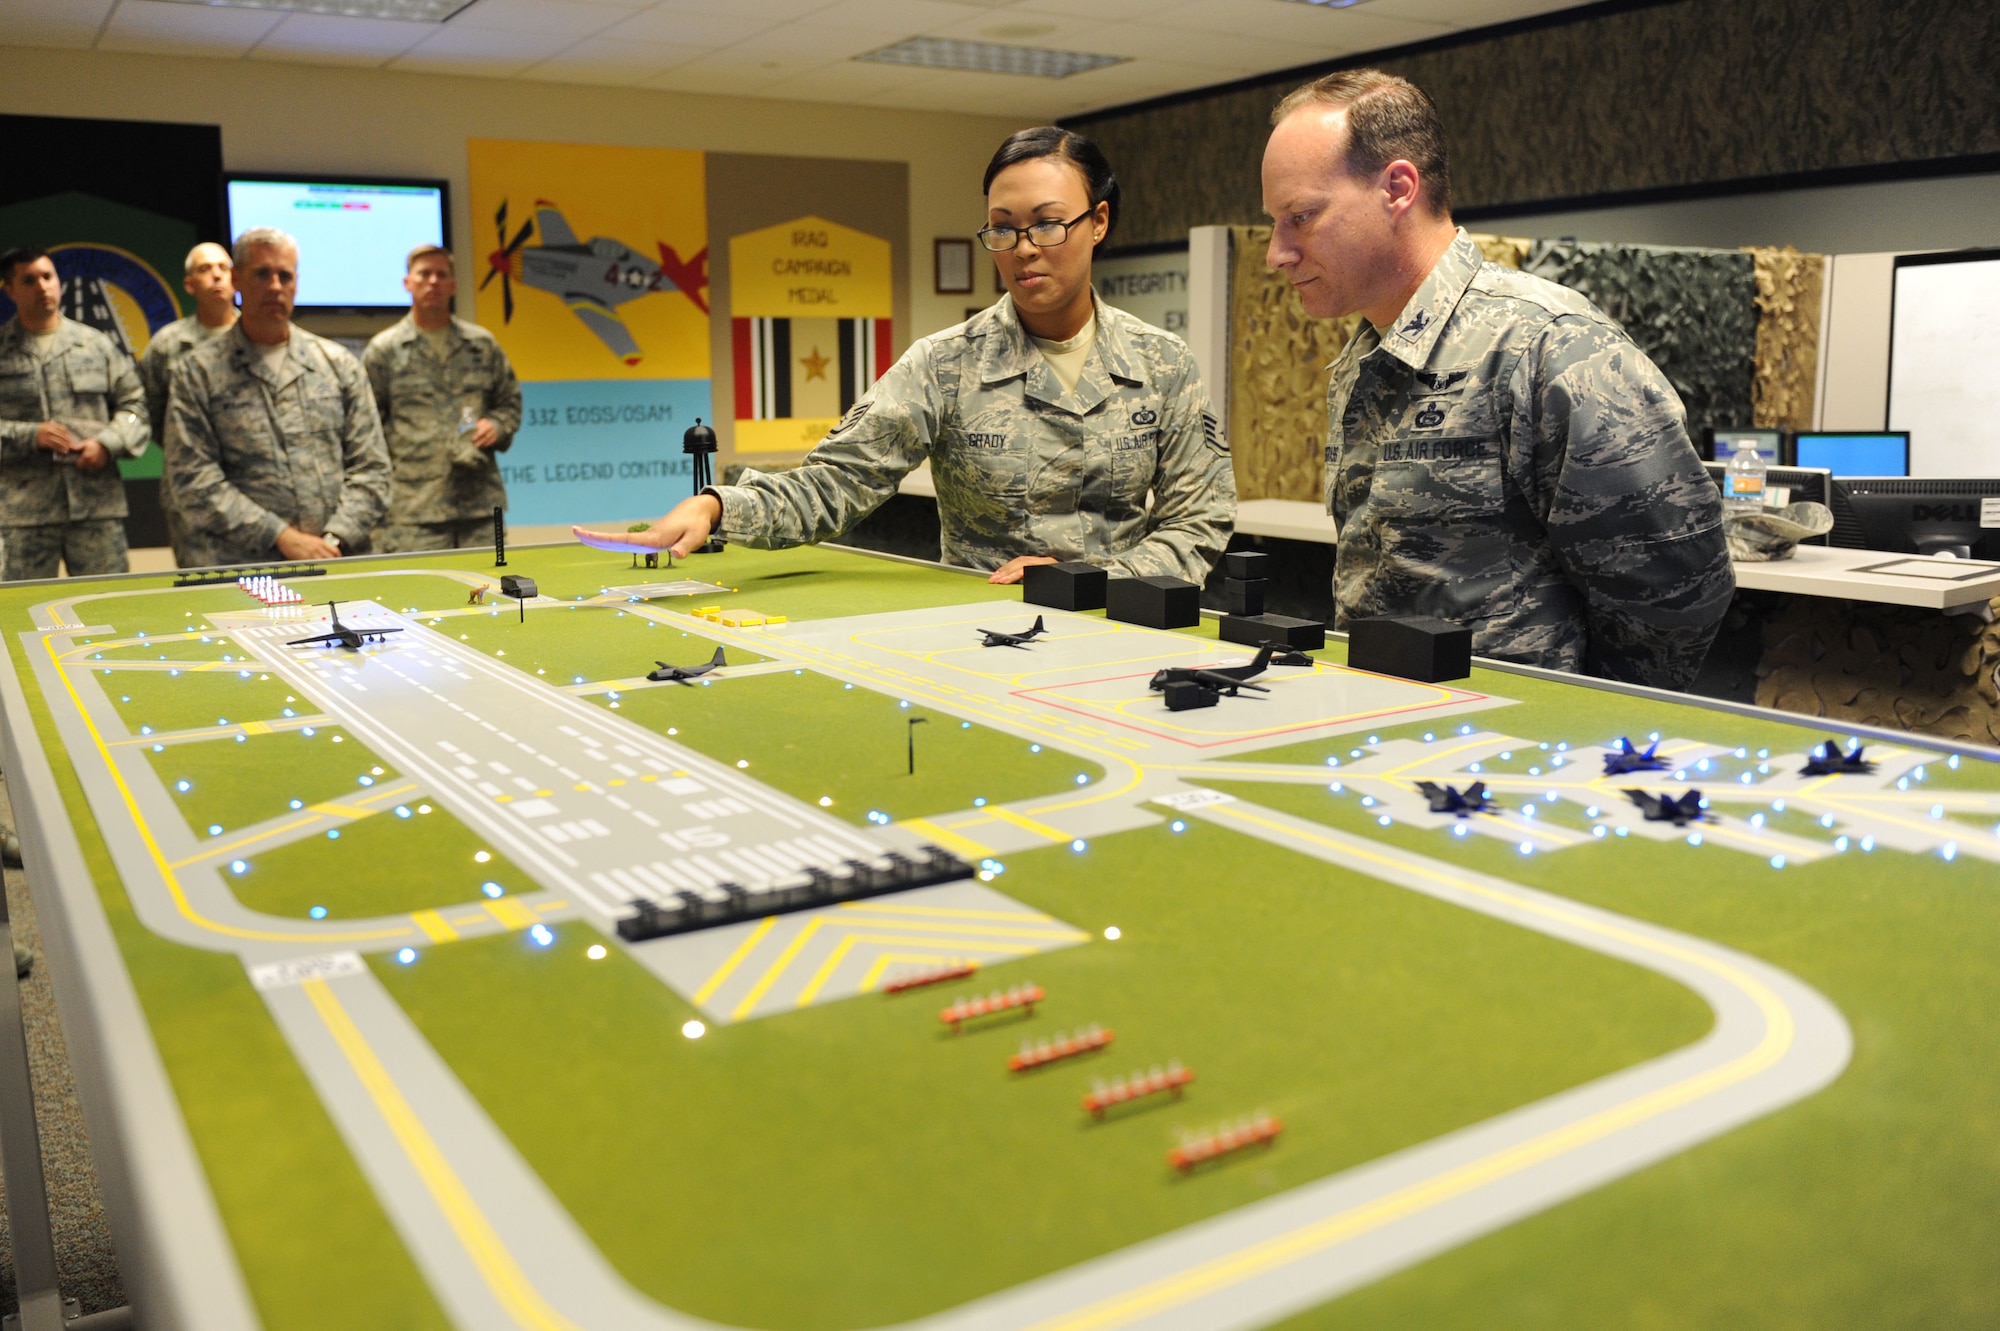 Staff Sgt. Shamena Grady, 334th Training Squadron instructor, briefs Col. Todd Weyerstrass, 2nd Air Force vice commander, on the air traffic control course at Cody Hall during an 81st Training Wing orientation tour July 12, 2016, on Keesler Air Force Base, Miss. The purpose of the tour was to become familiar with the wing’s mission, operations and personnel. (U.S. Air Force photo by Kemberly Groue/Released)